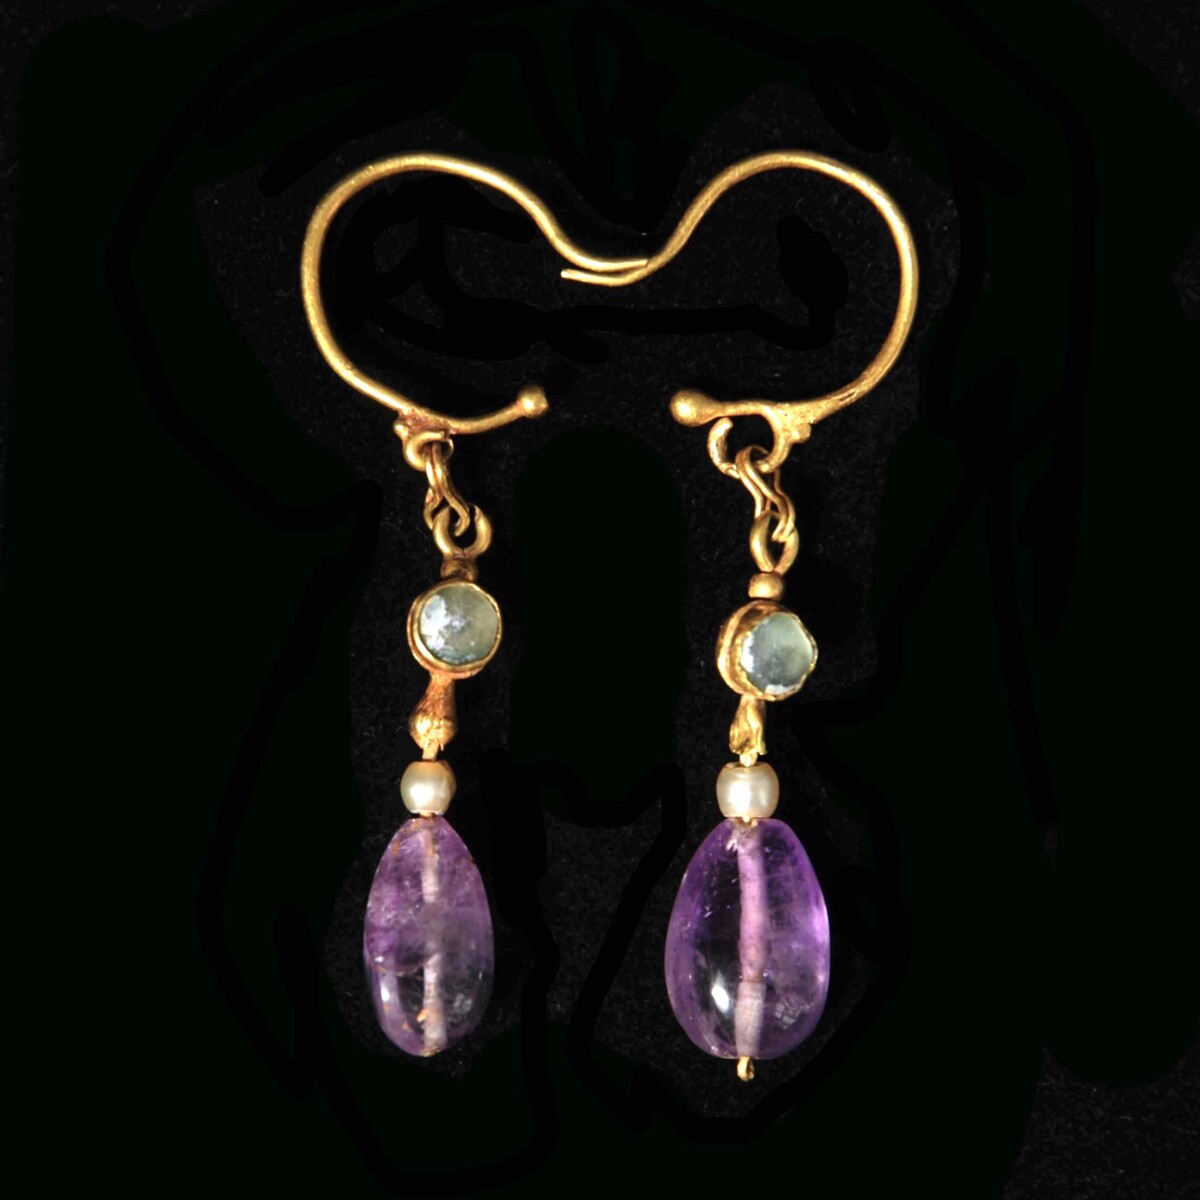 Late Roman gold earrings with pearl and amethyst